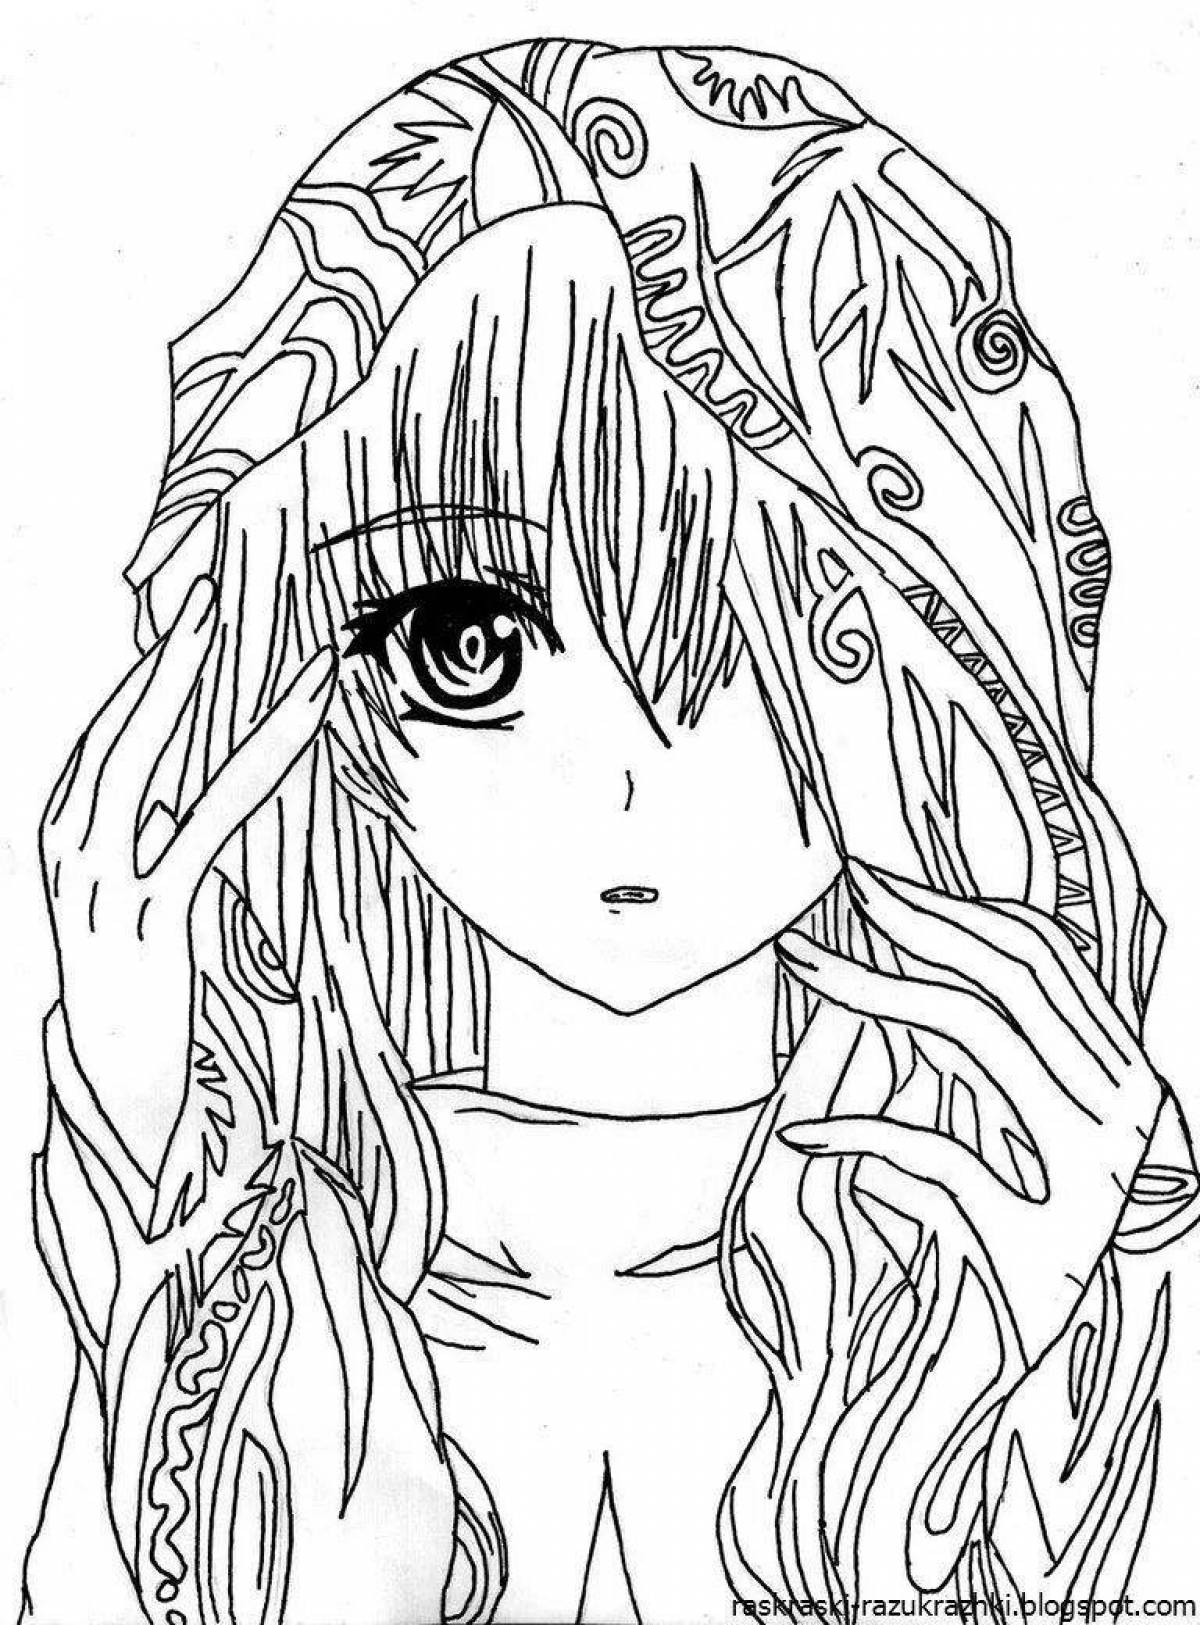 Inviting anime coloring pages for girls 16 years old